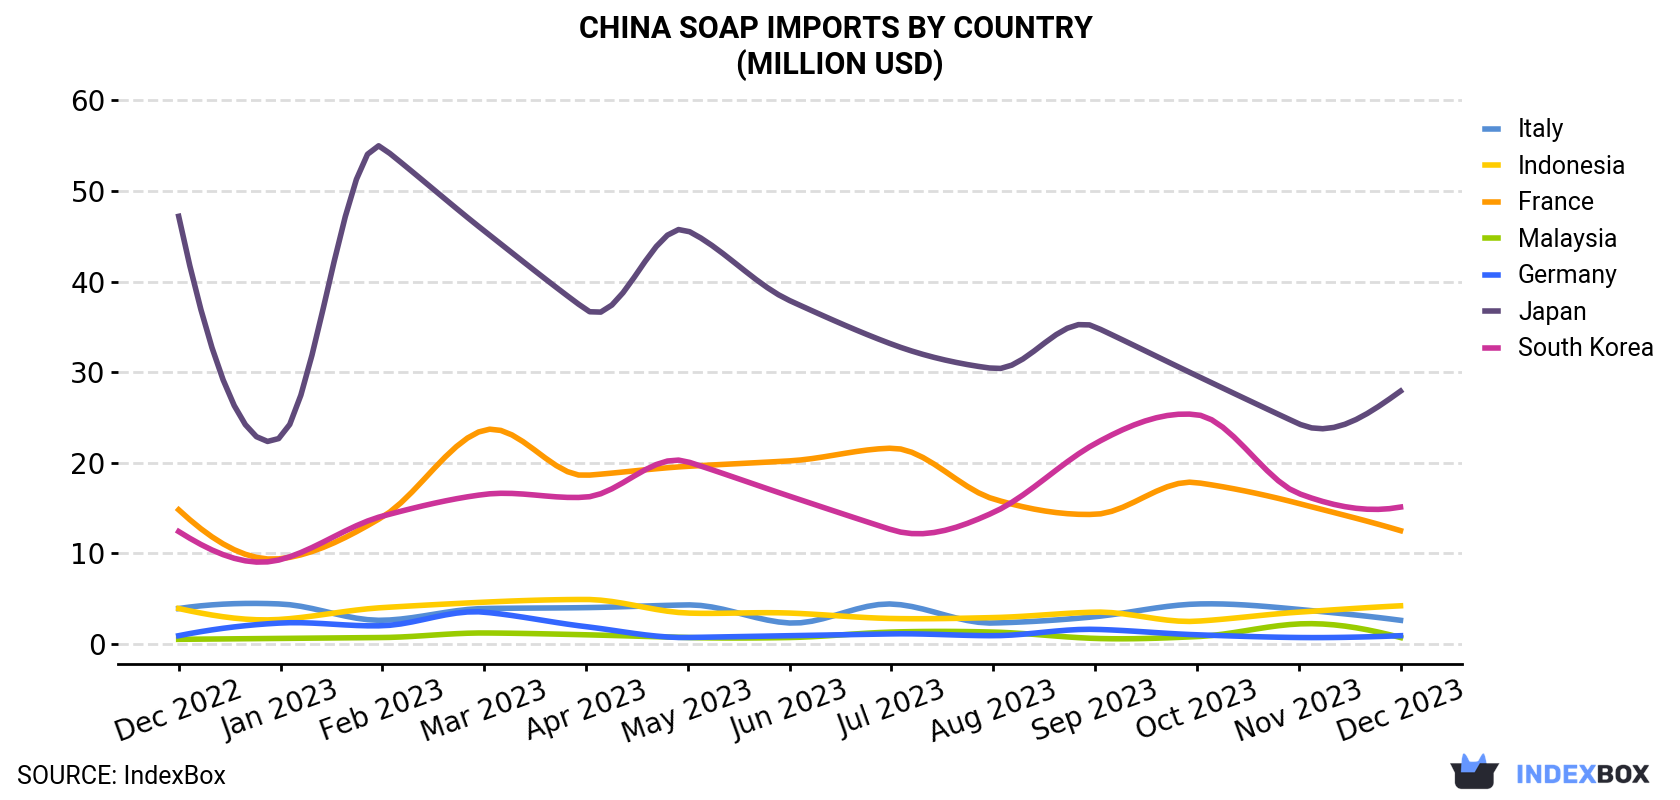 China Soap Imports By Country (Million USD)